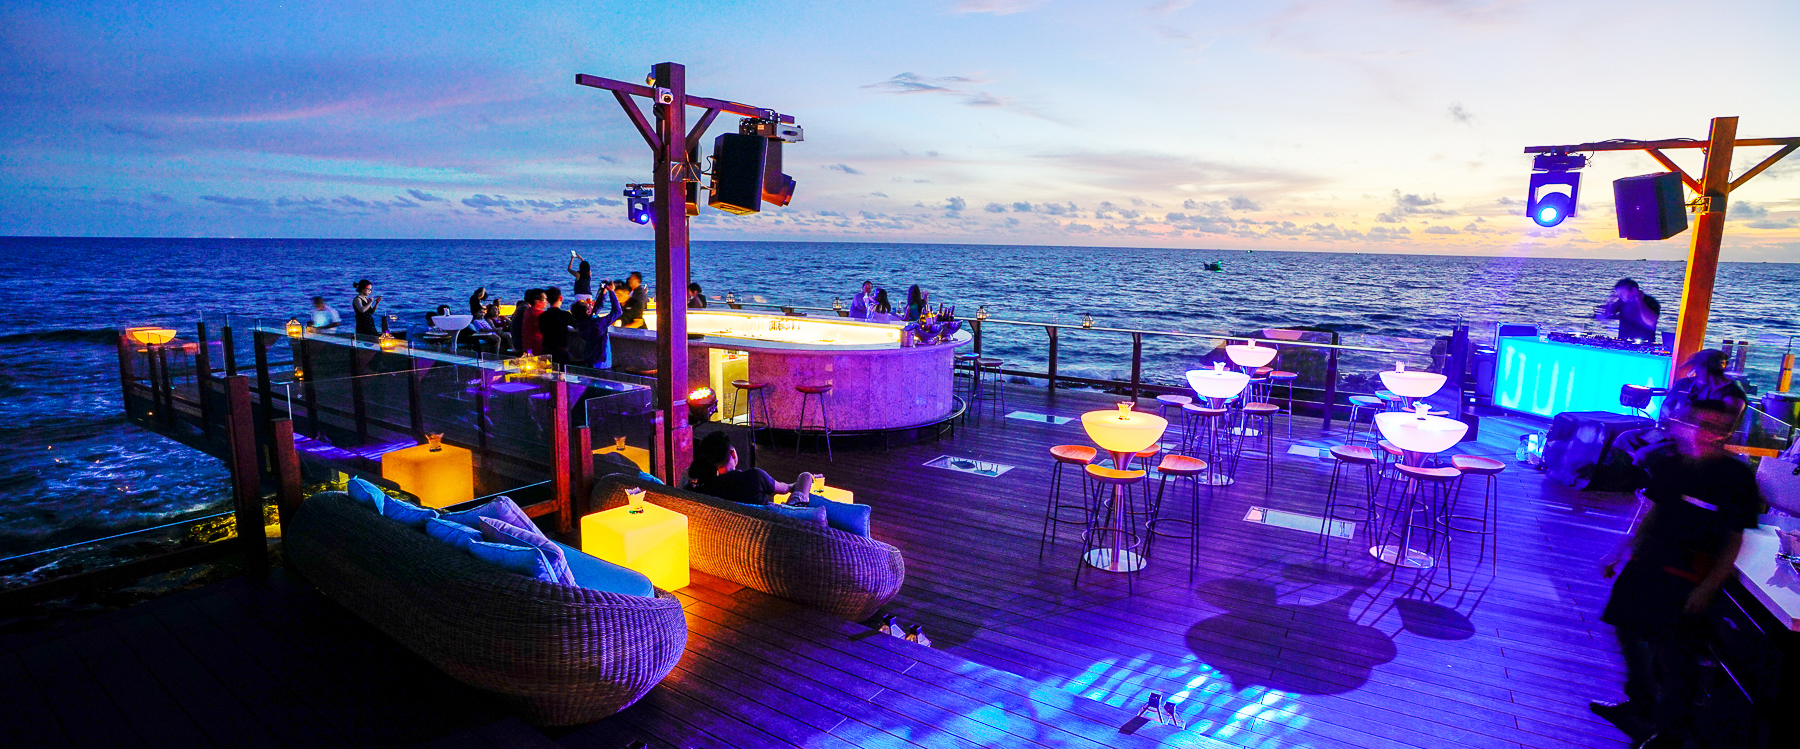 Nam Nghi Resort Delivers Exceptional Sound and Lighting at the Rock Island Club with HARMAN Professional Solutions